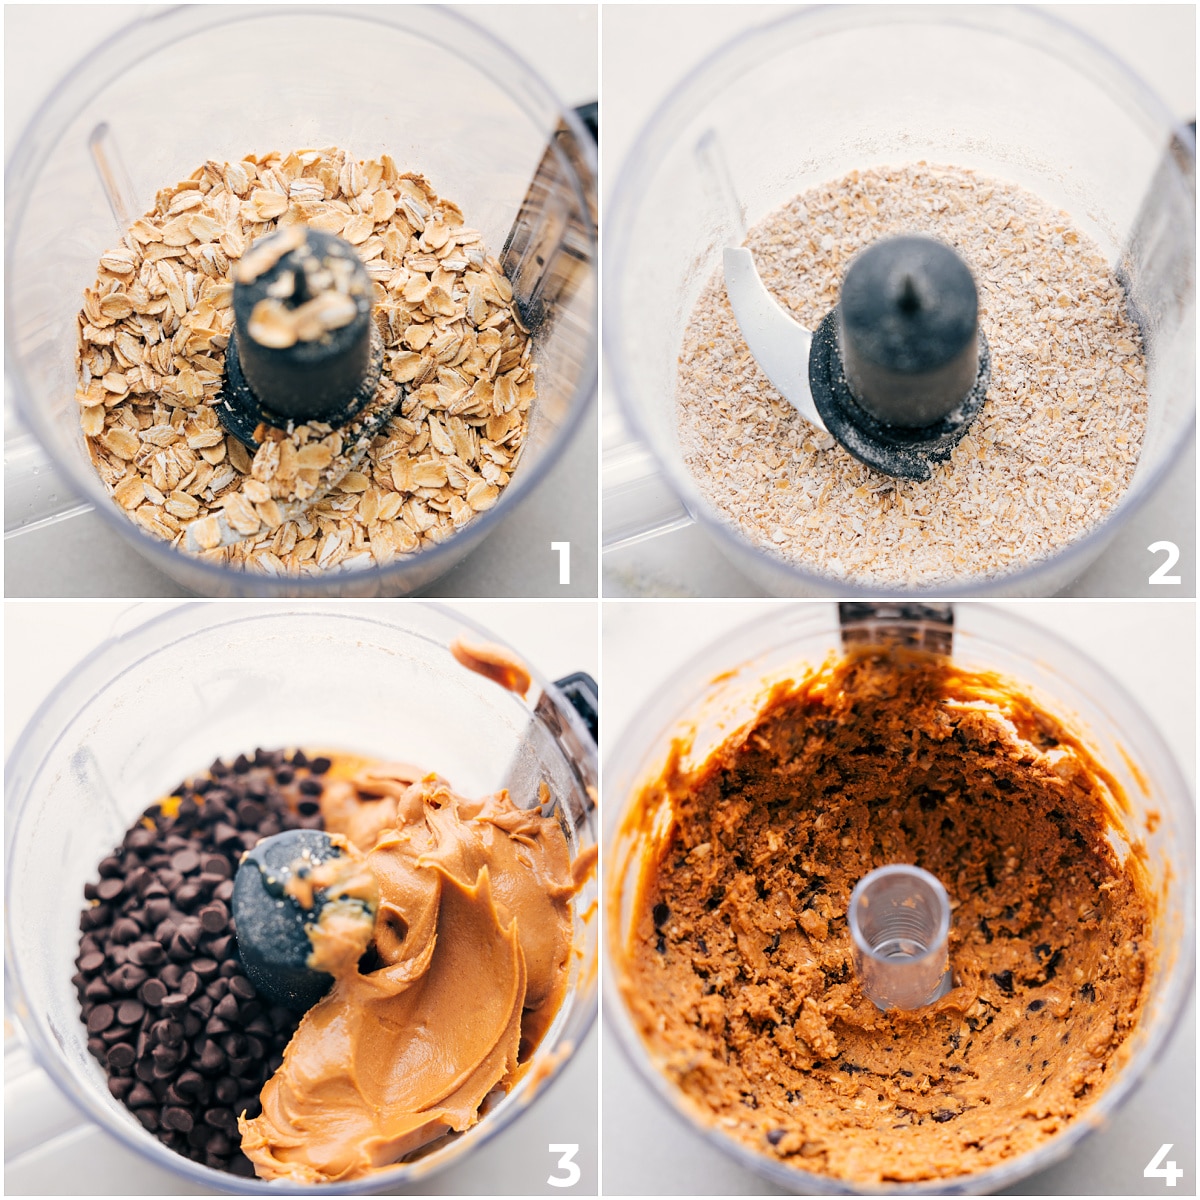 All the ingredients in these homemade protein bars added to a food processor and it all being pulsed together.